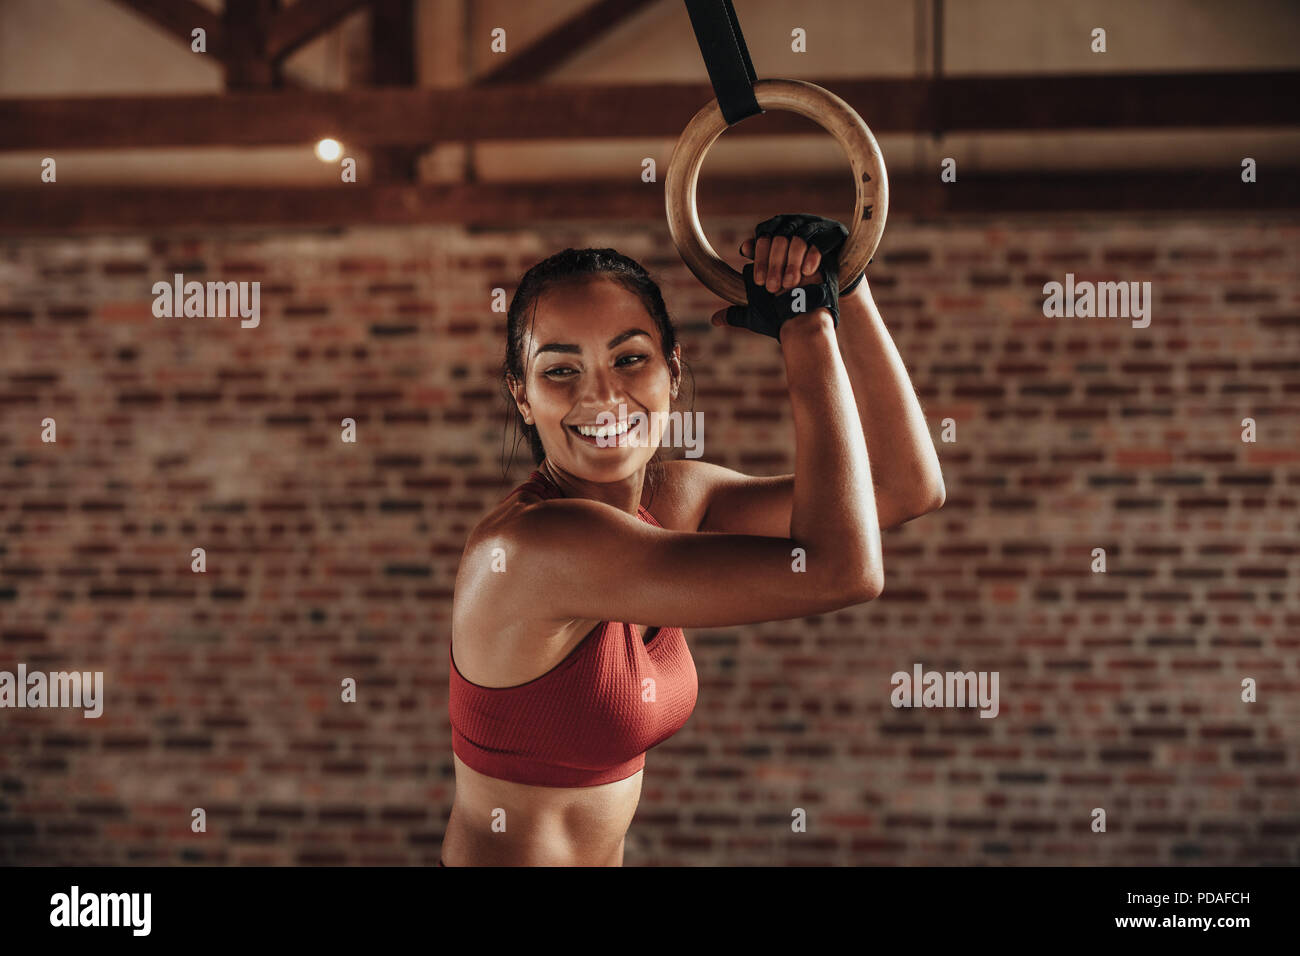 Sporty woman using gymnastic rings/ Sporty women in a gym exercising with gymnastic  rings Stock Photo